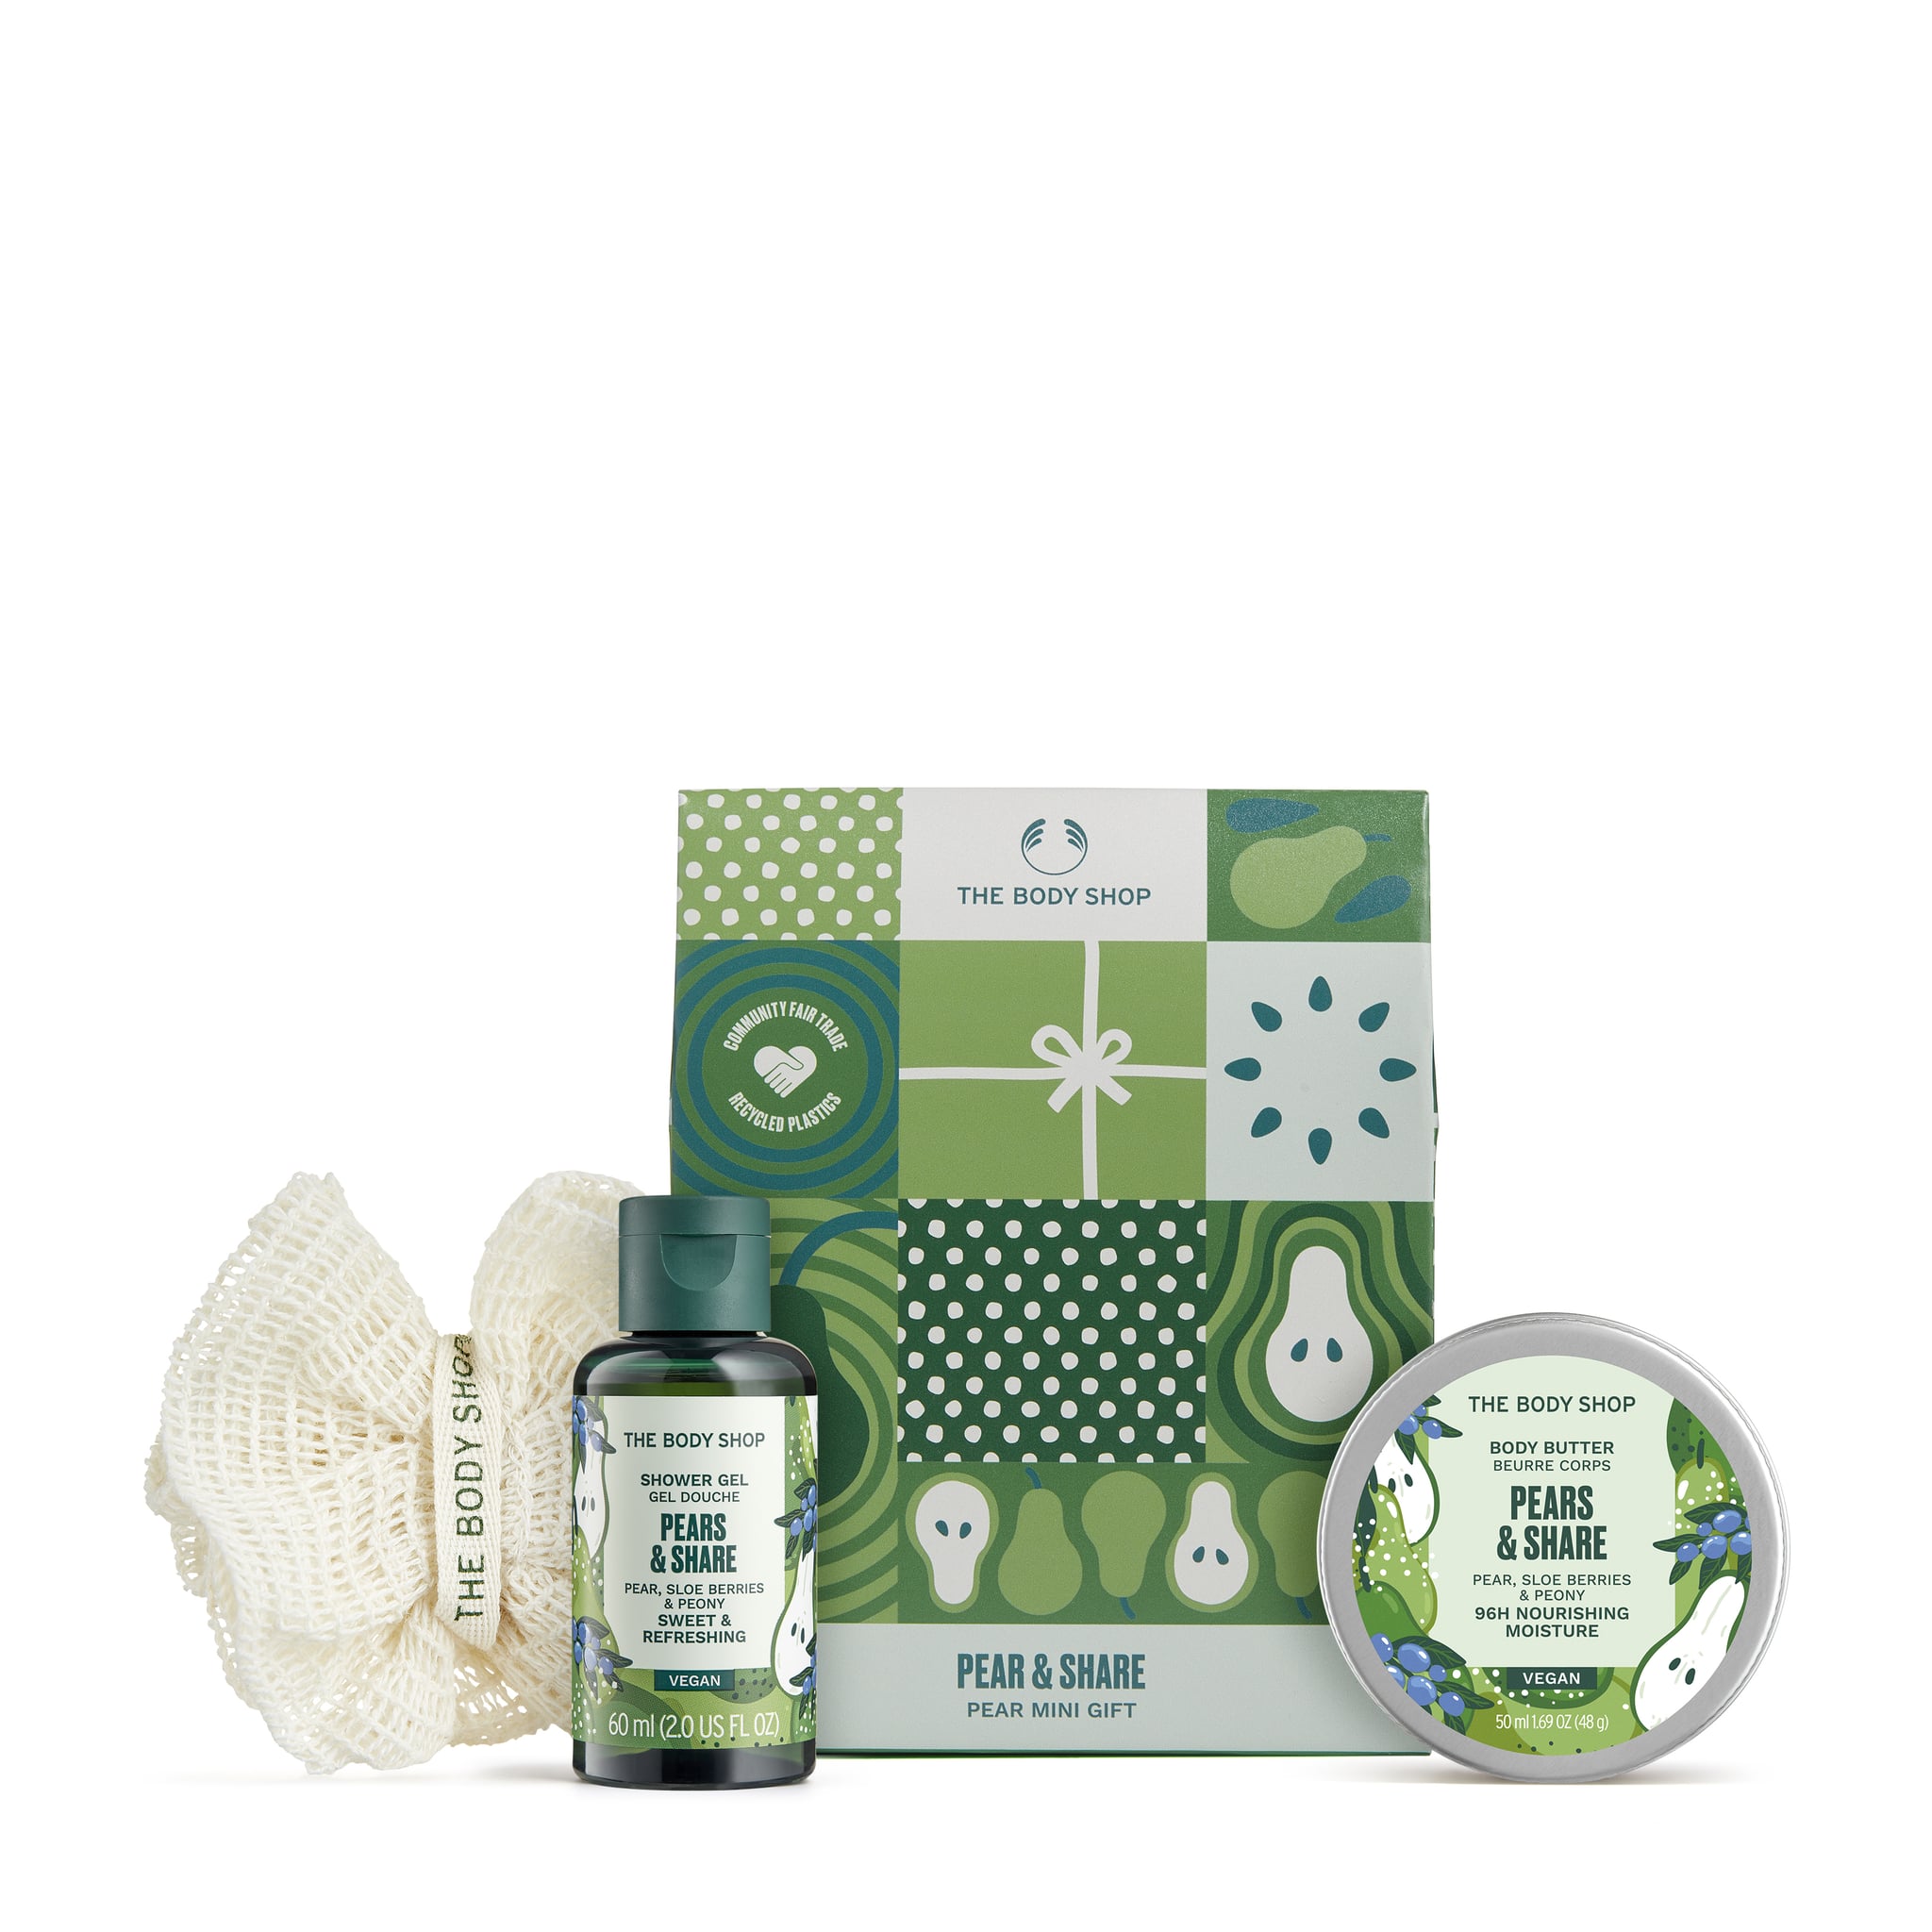 Christmas Gifting at The Body Shop this year